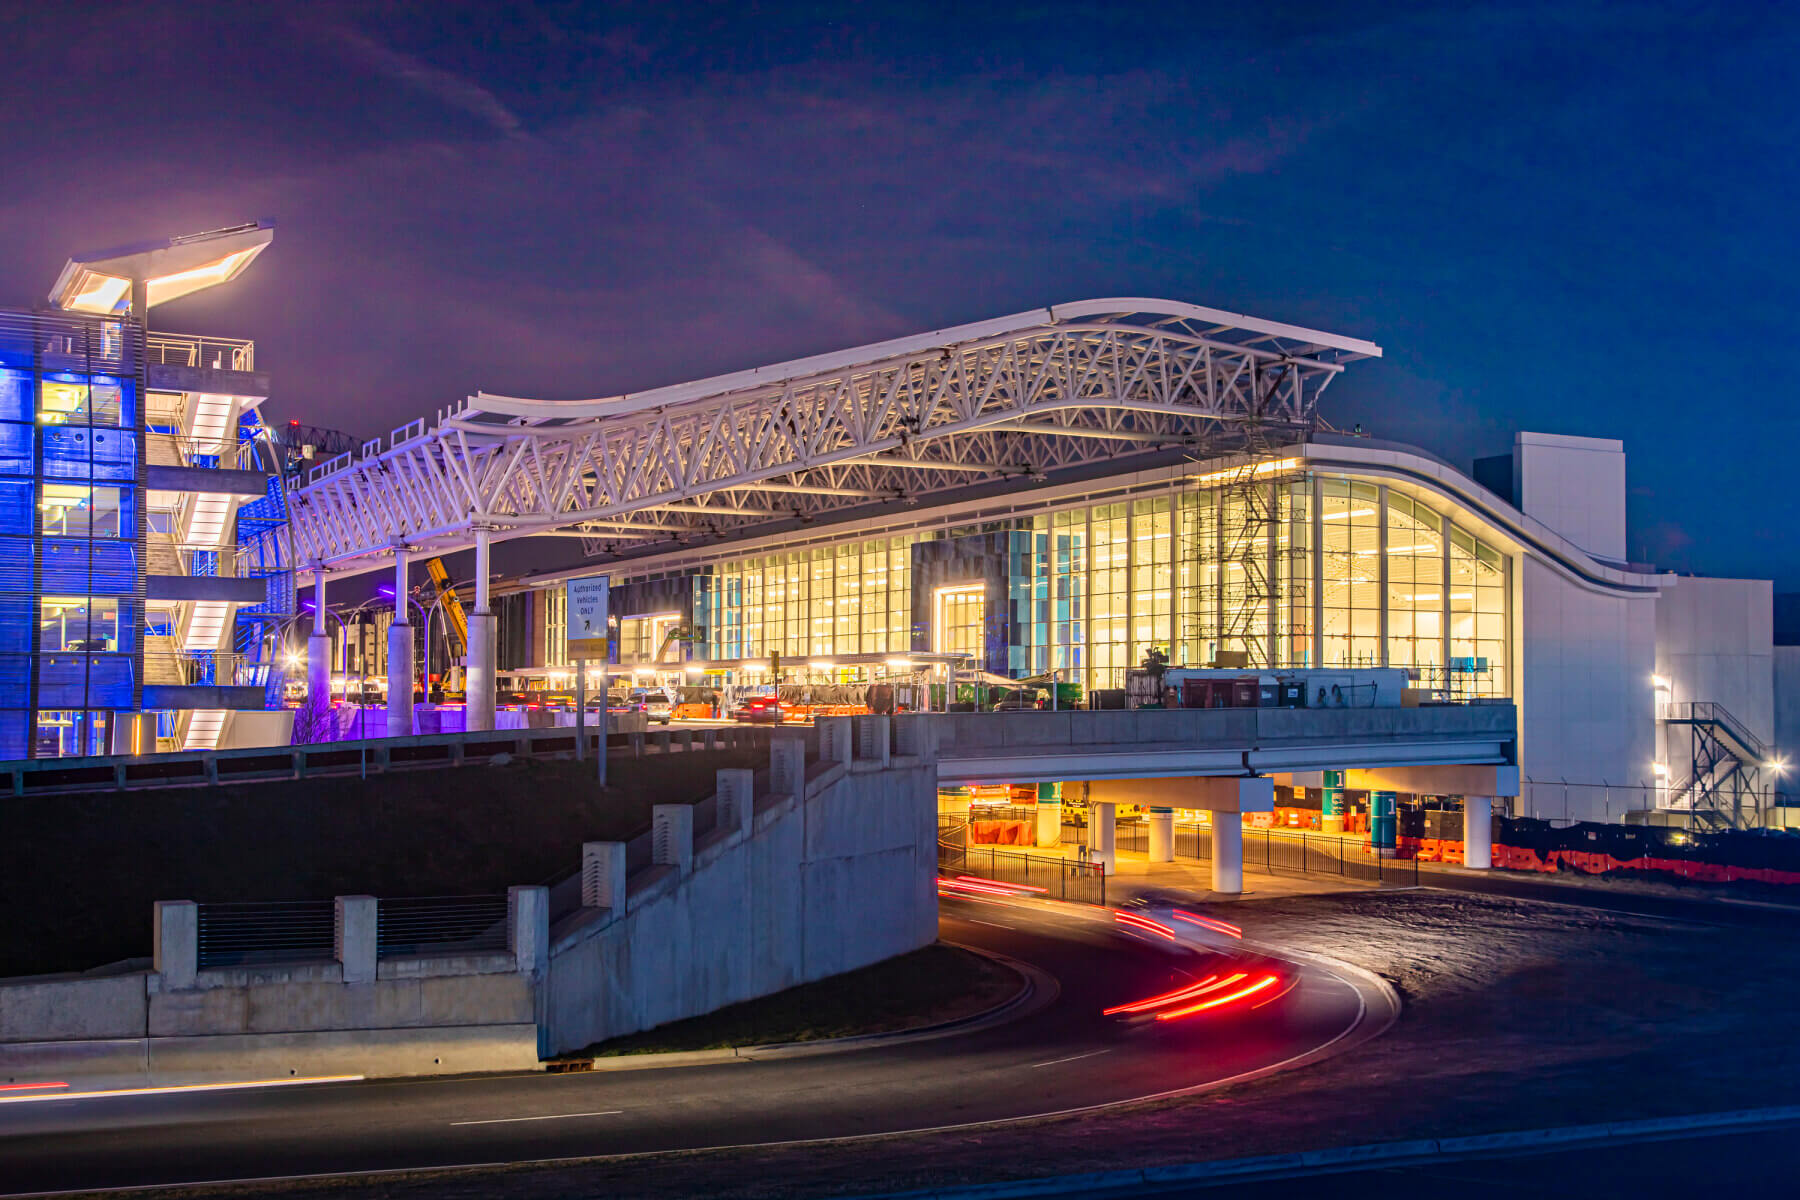 the steel canopy over the curbside outside the Charlotte Douglas International Airport terminal at dusk